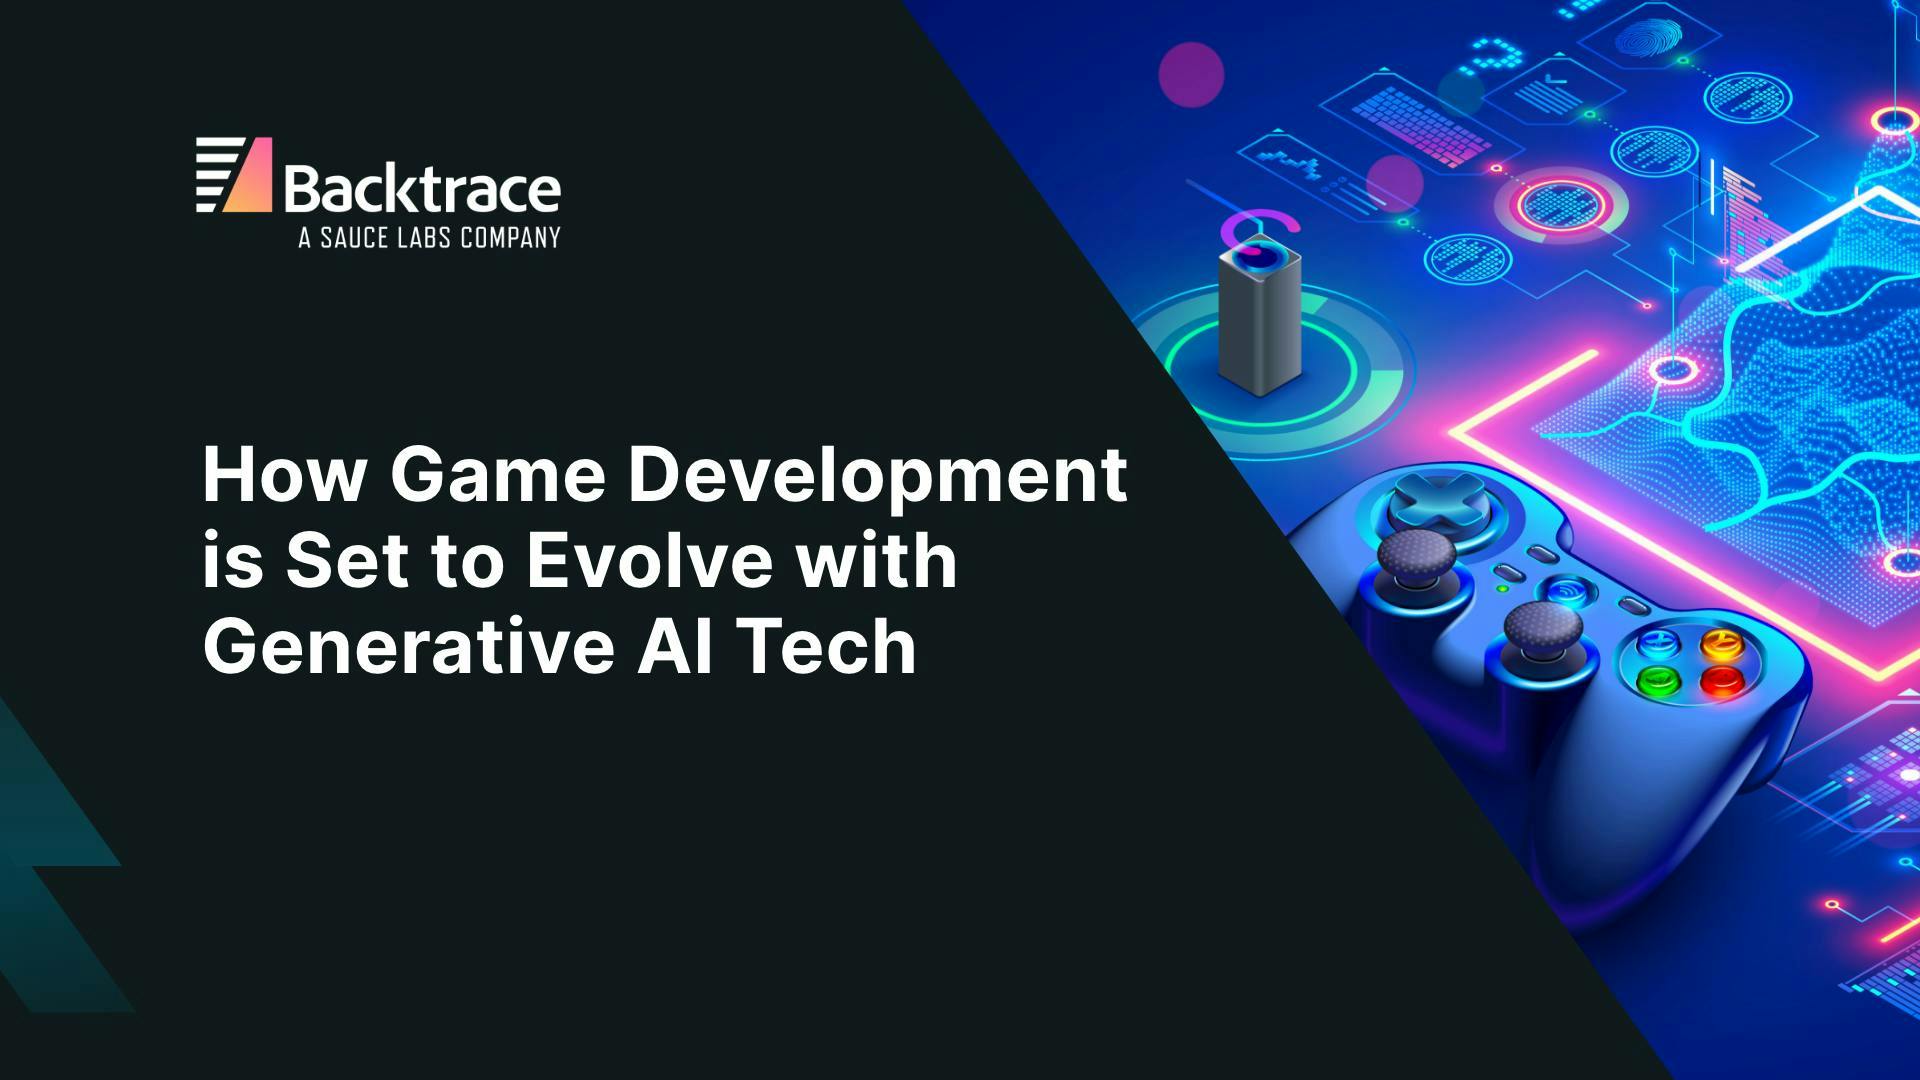 Thumbnail image for blog post: How Game Development Is Set to Evolve With Generative AI Tech